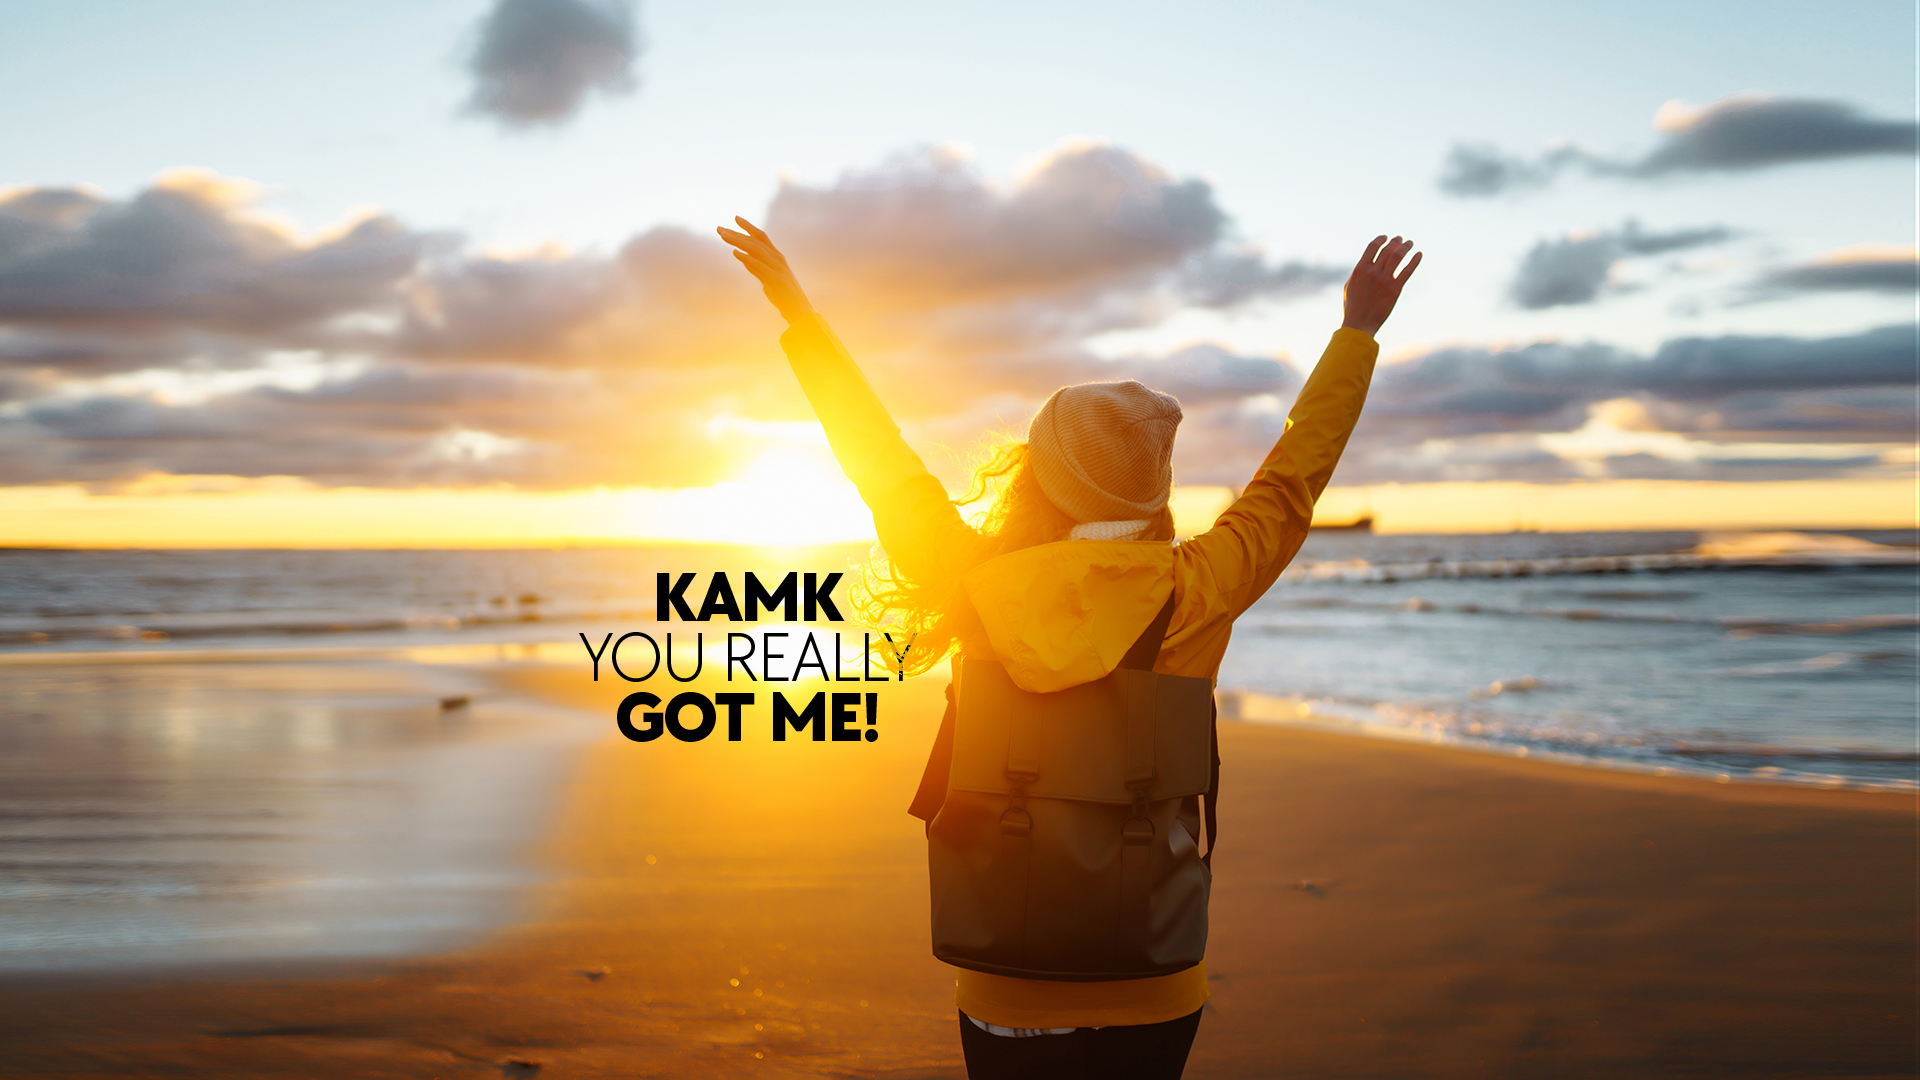 The girl is standing on the beach, looking out to sea with her hands up. The picture says KAMK you really got me.